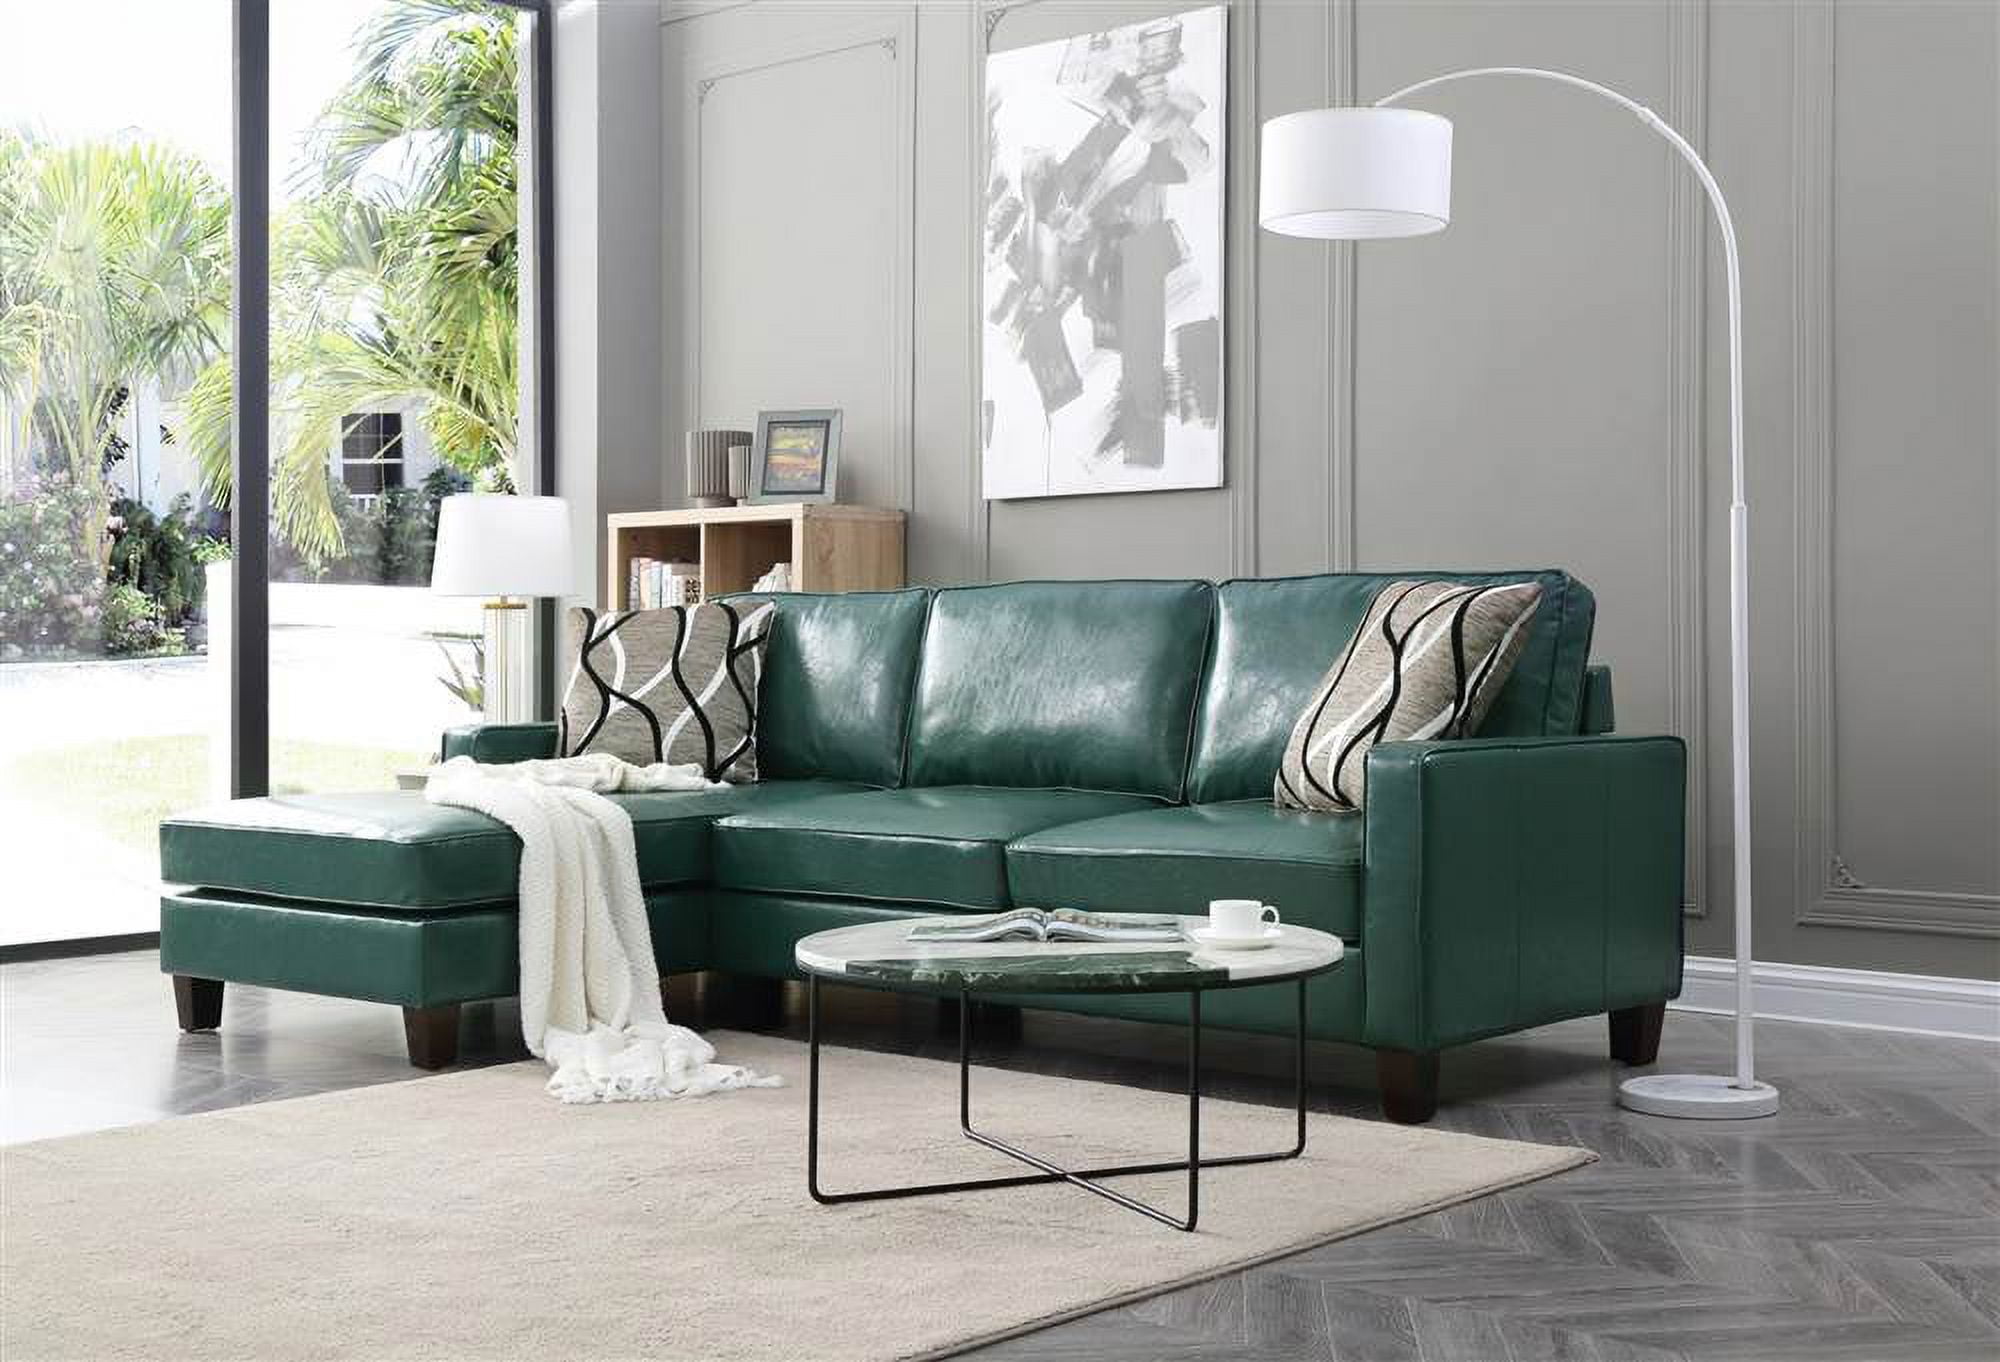 Myco Furniture 2035 Tq 37 X 67 39 In Glenbrook Faux Leather Sectional Turquoise Com